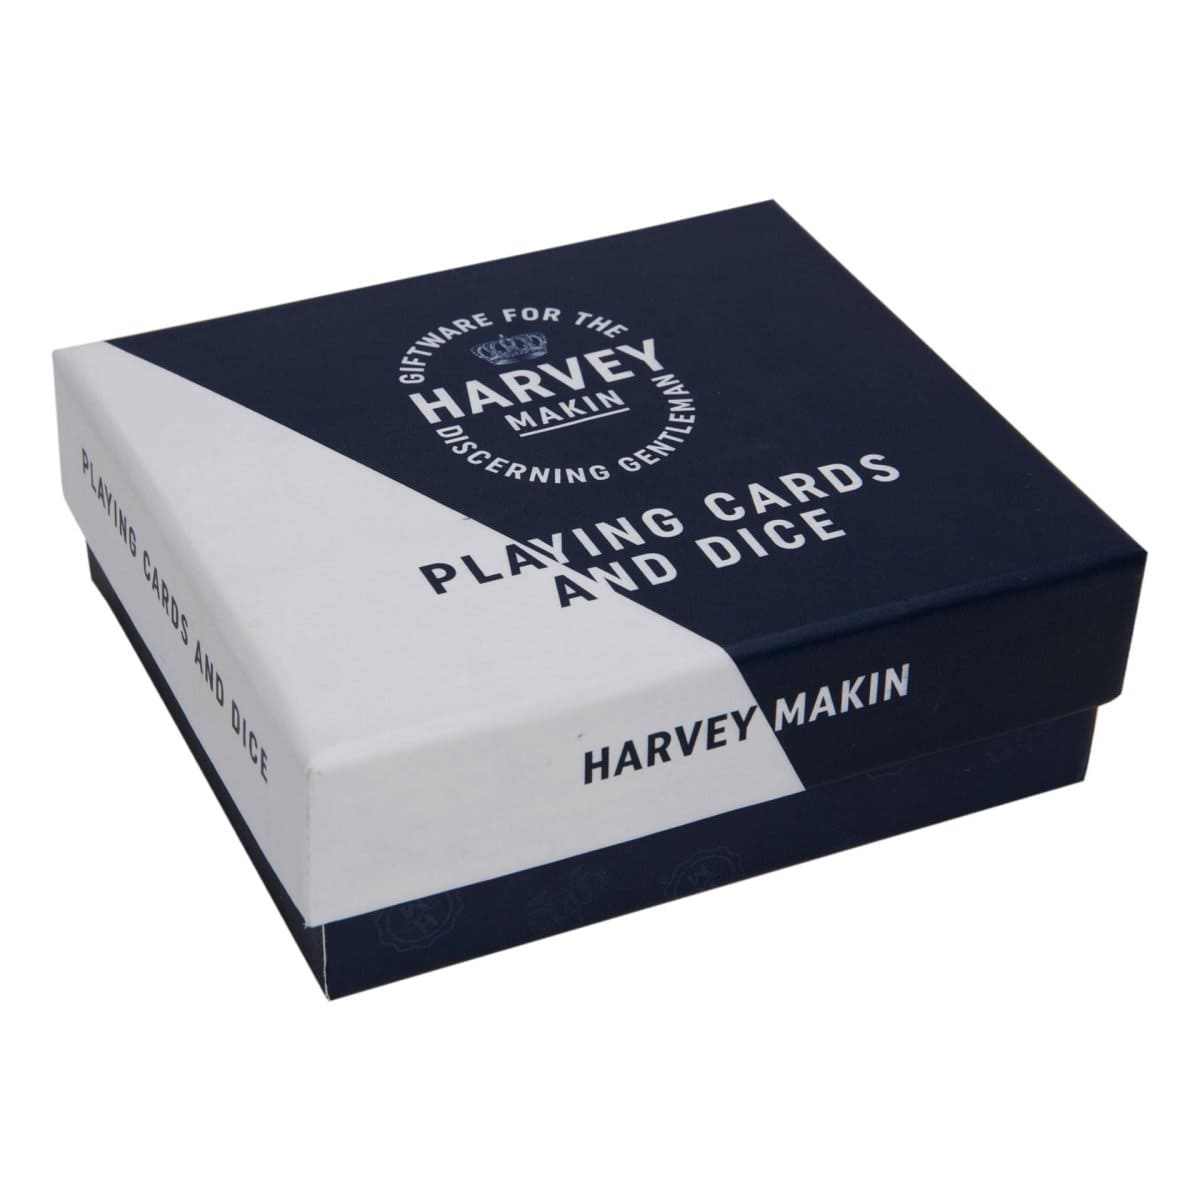 Harvey Makin Rose wood Games Set - Cards with Dice - Games & Puzzles by Harvey Makin